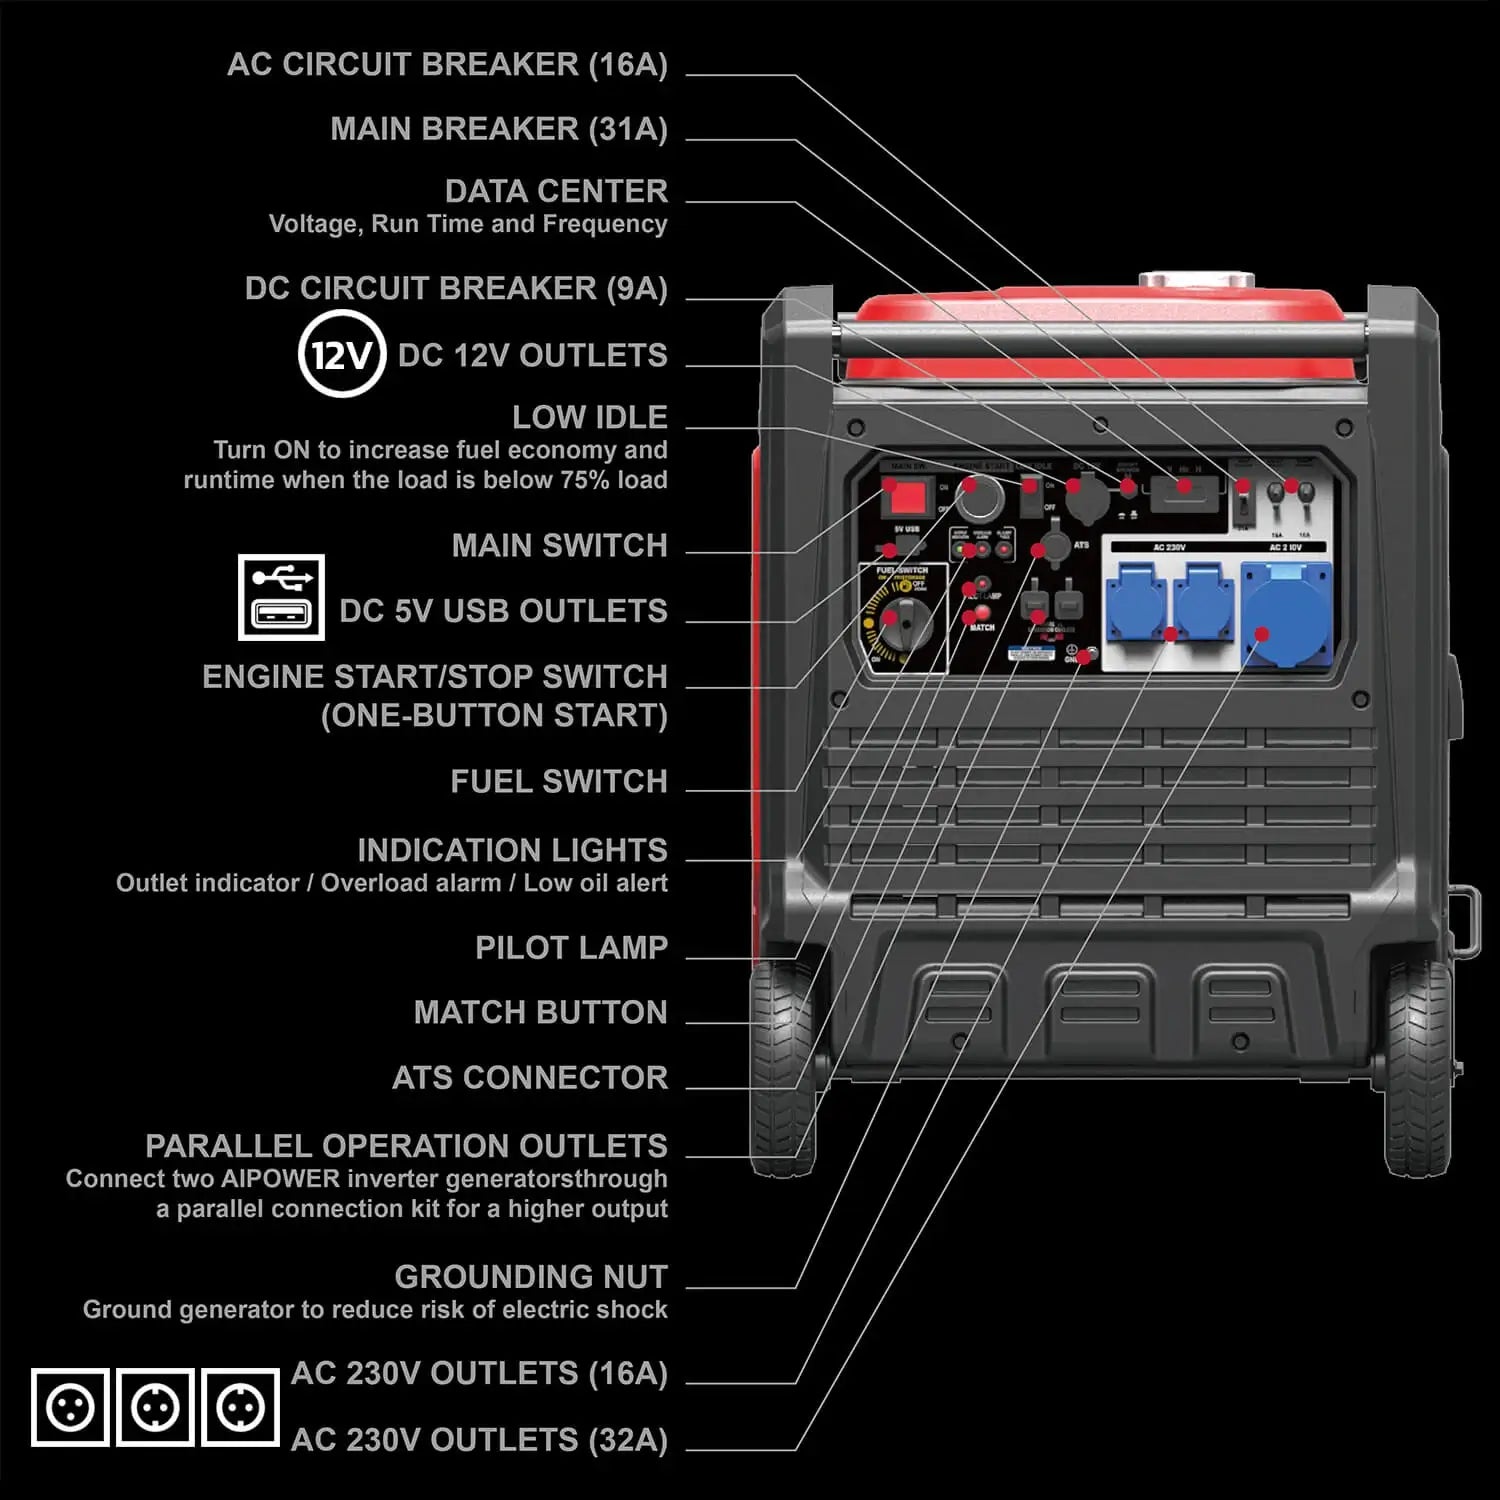 A-iPower Portable Inverter Generator, 1500W Super Quiet, EPA & CARB  Compliant CO Sensor, Portable Ultra-Light Weight For Backup Home Use,  Tailgating 